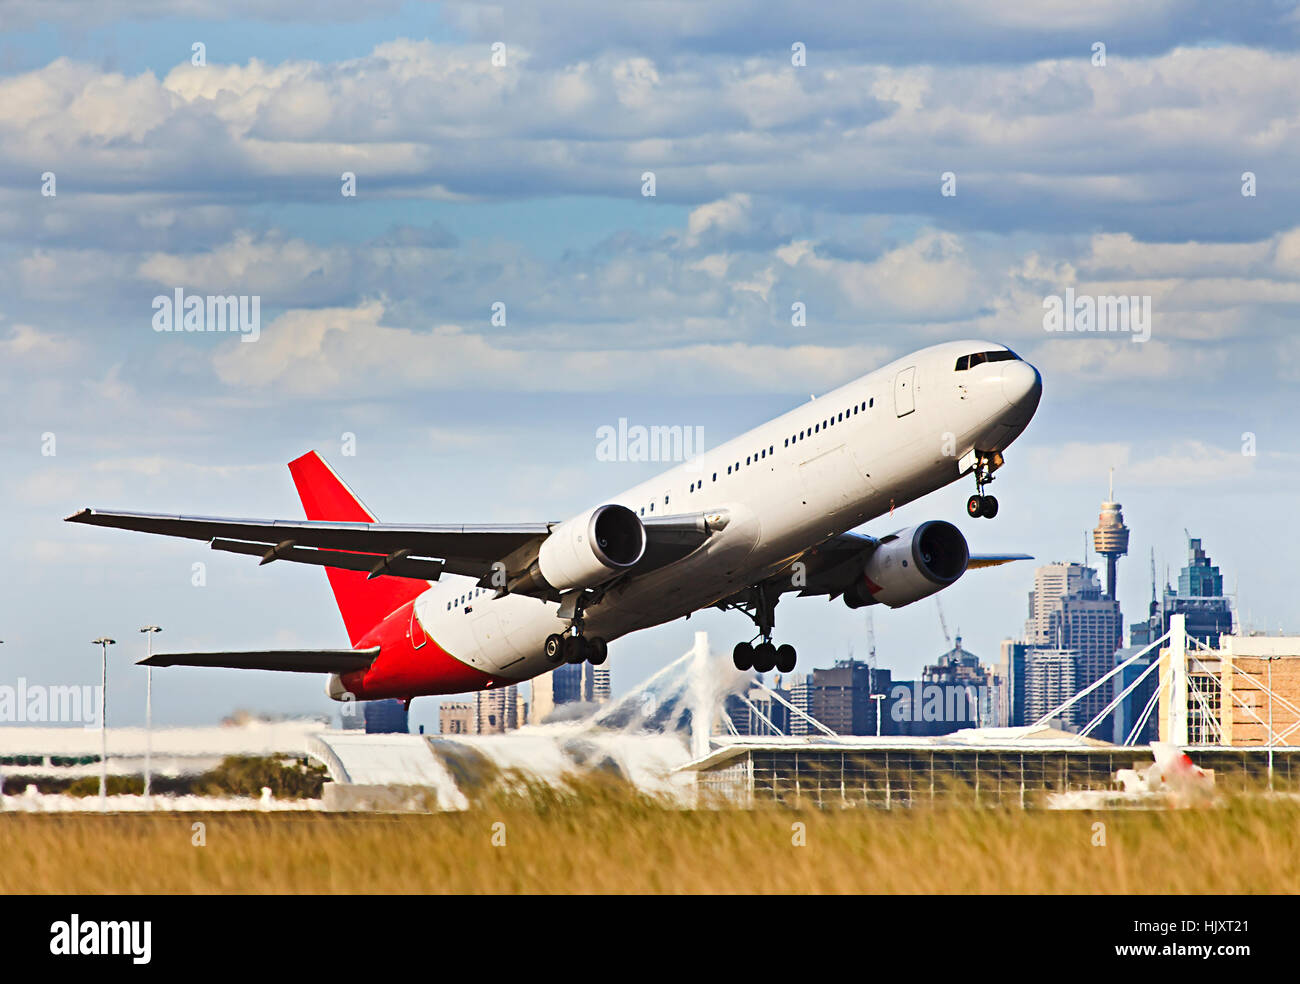 Modern passenger airplaine taking off from airport airfield against Sydney city CBD buildings and towers towards blue sky. Stock Photo